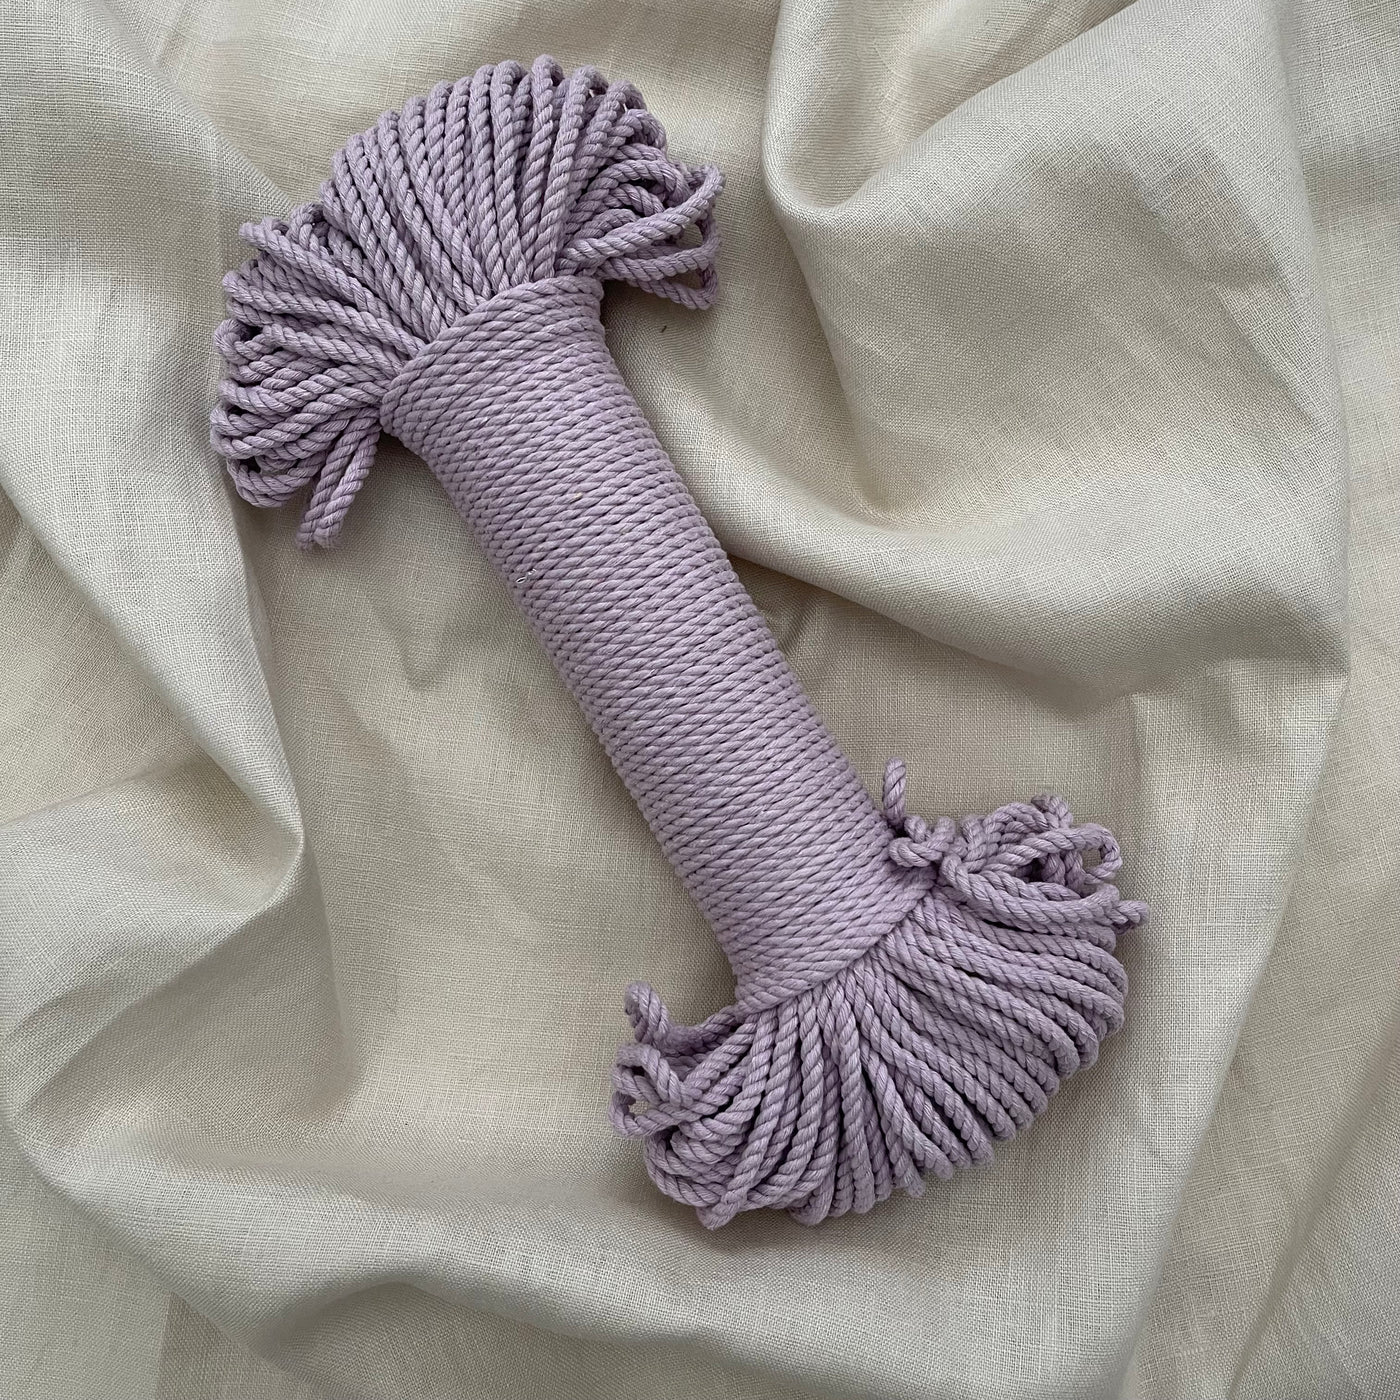 Macrame 3ply cotton rope 4mm in a classical 'Wisteria' colour is a fantastic addition to your fibre collection and is perfect for macrame projects such as plant hangers or pieces that require that little bit of extra guts!